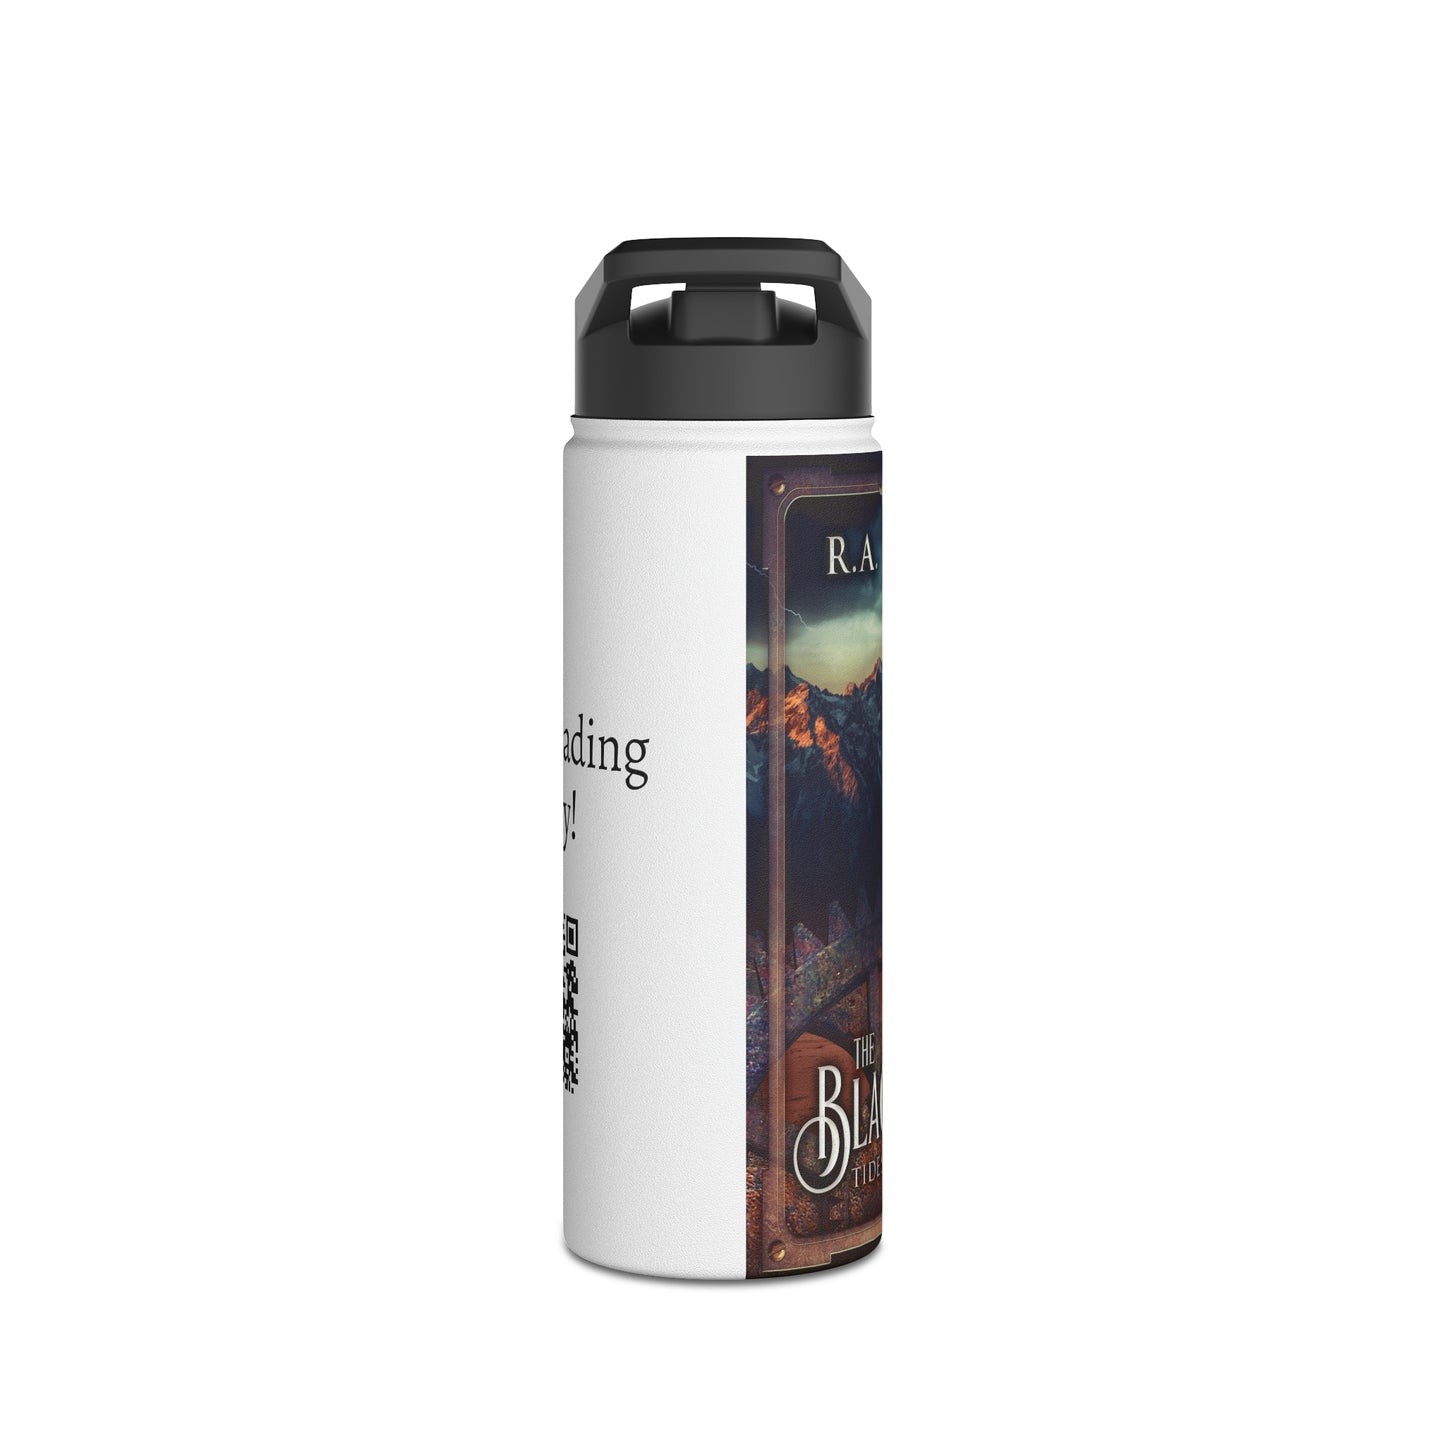 The Black Wall - Stainless Steel Water Bottle